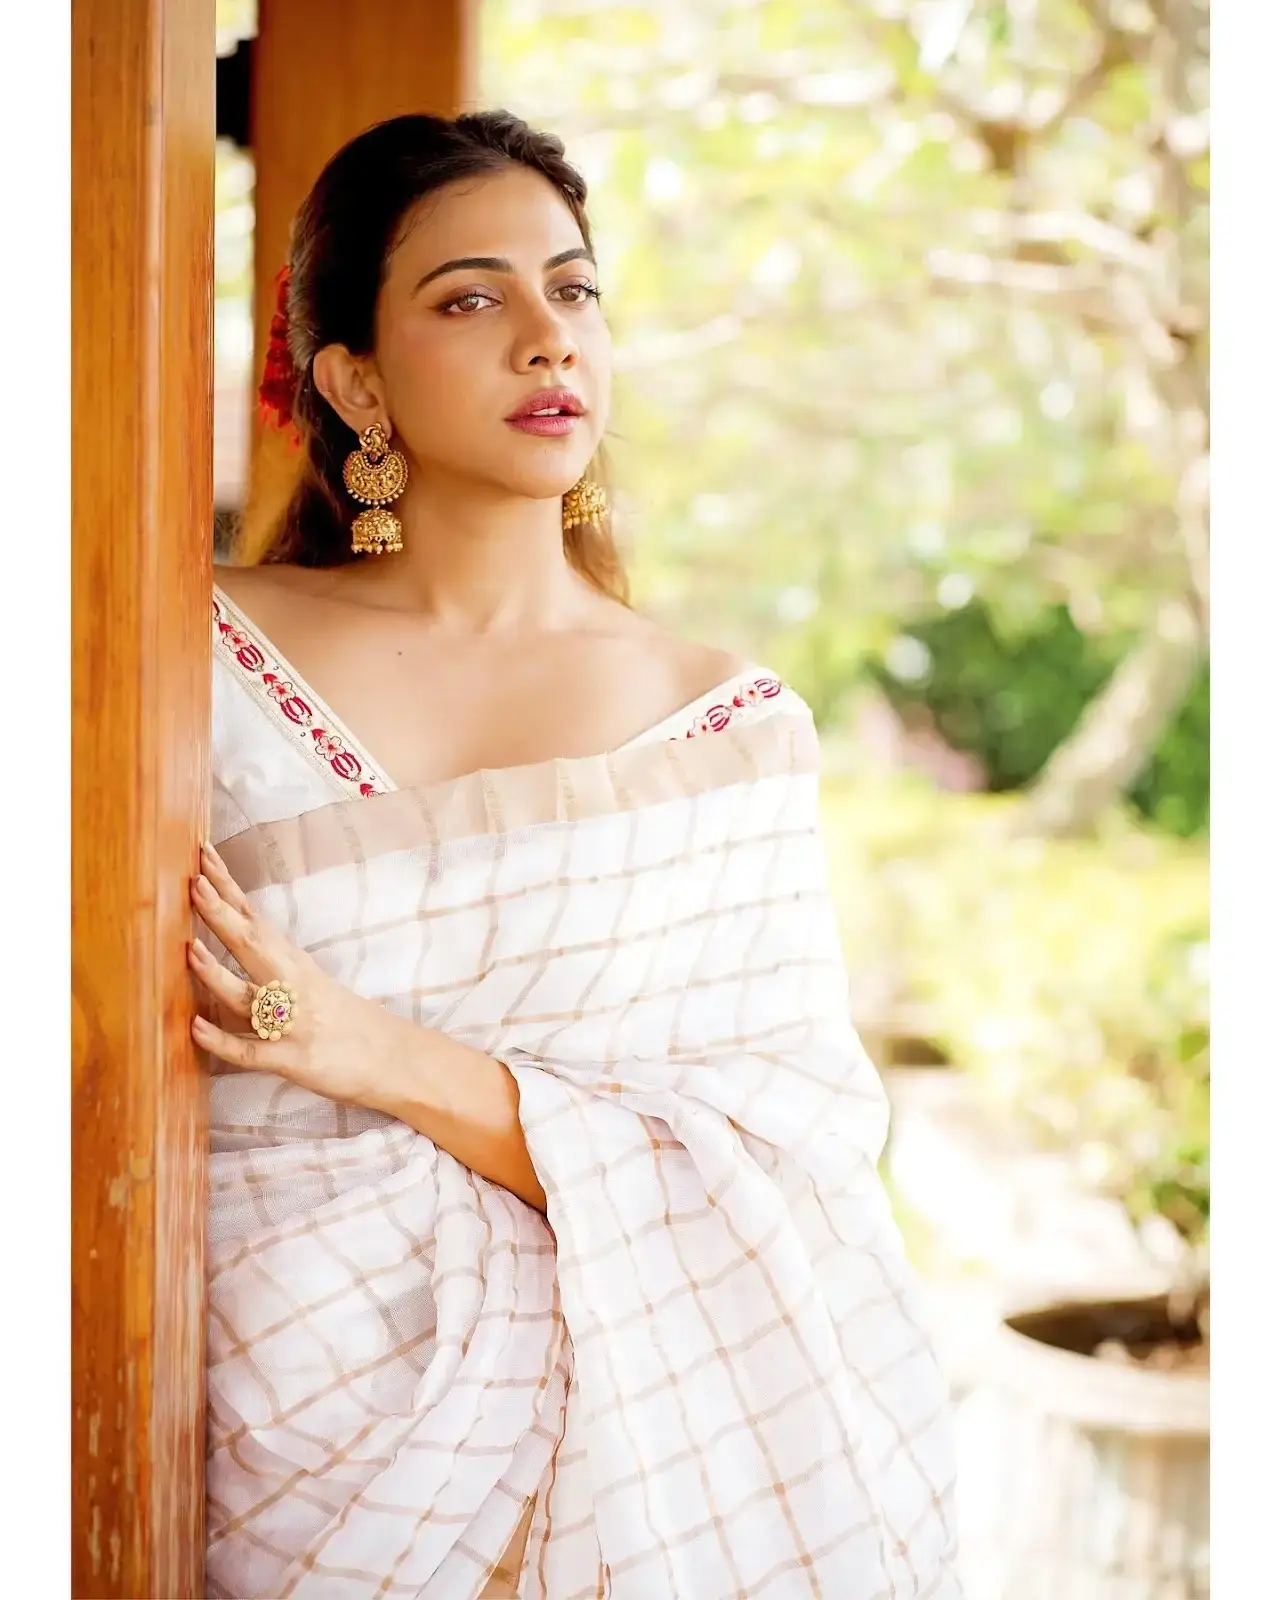 INDIAN GIRL MADONNA SEBASTIAN IMAGES IN TRADITIONAL WHITE SAREE 5